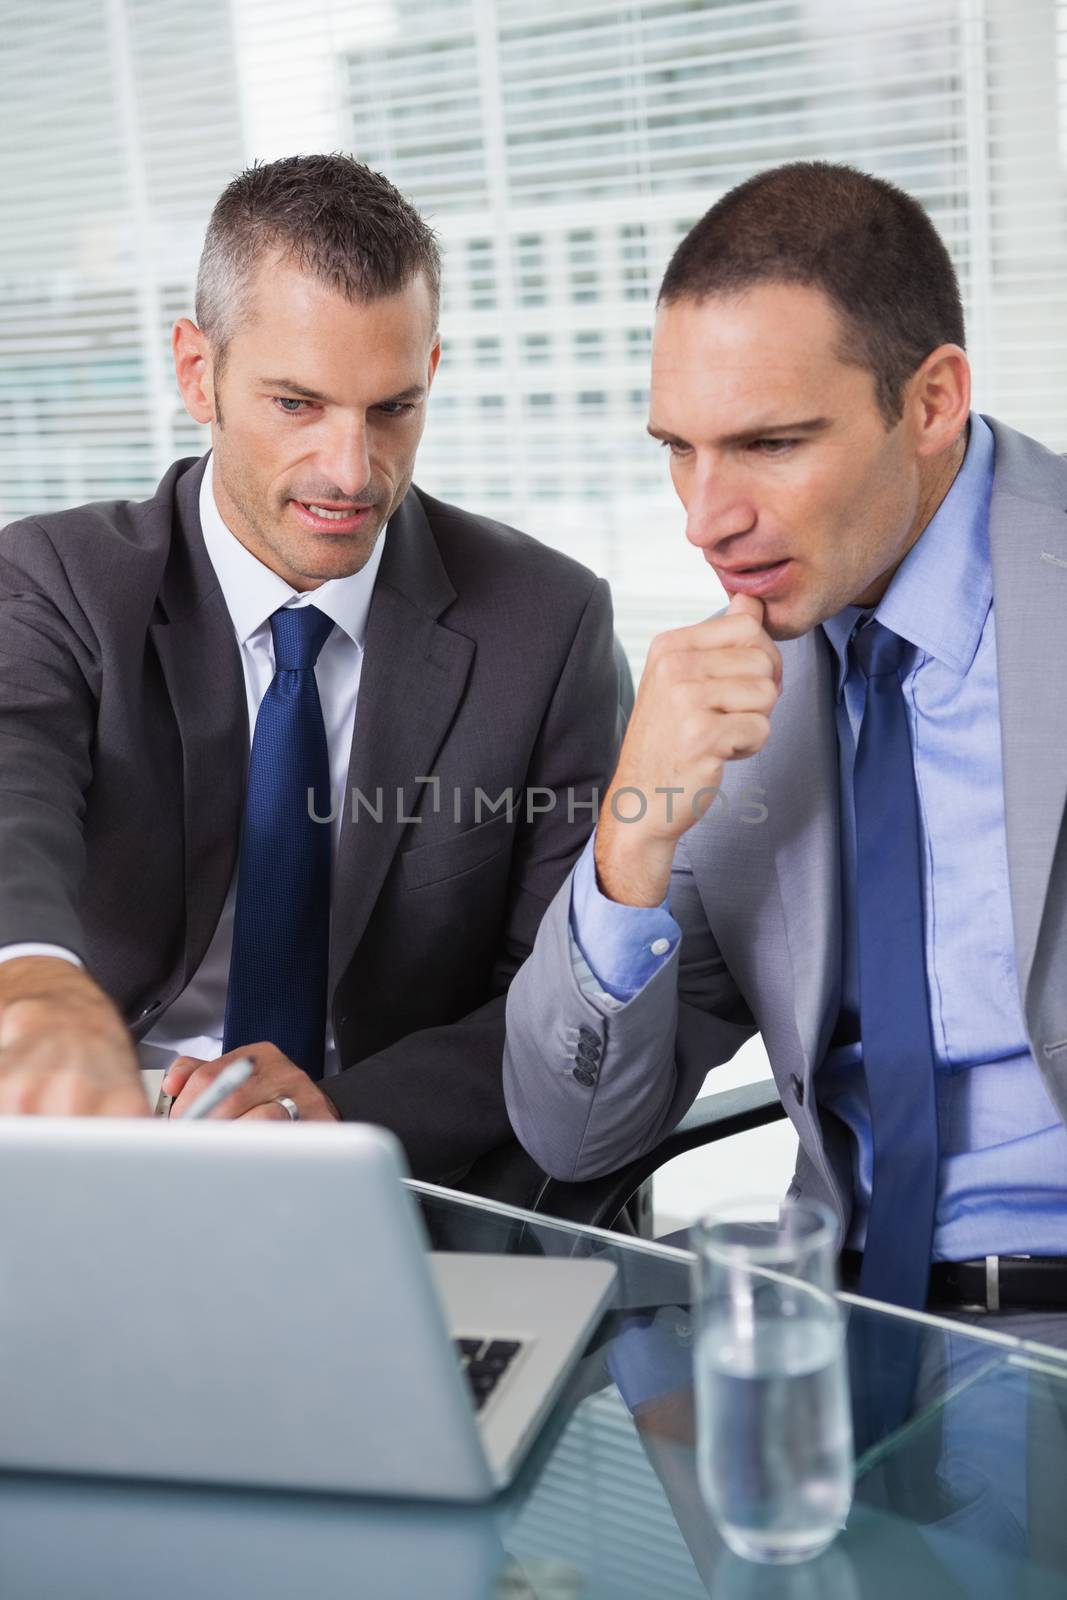 Concentrated businessmen analyzing documents on their laptop in bright office